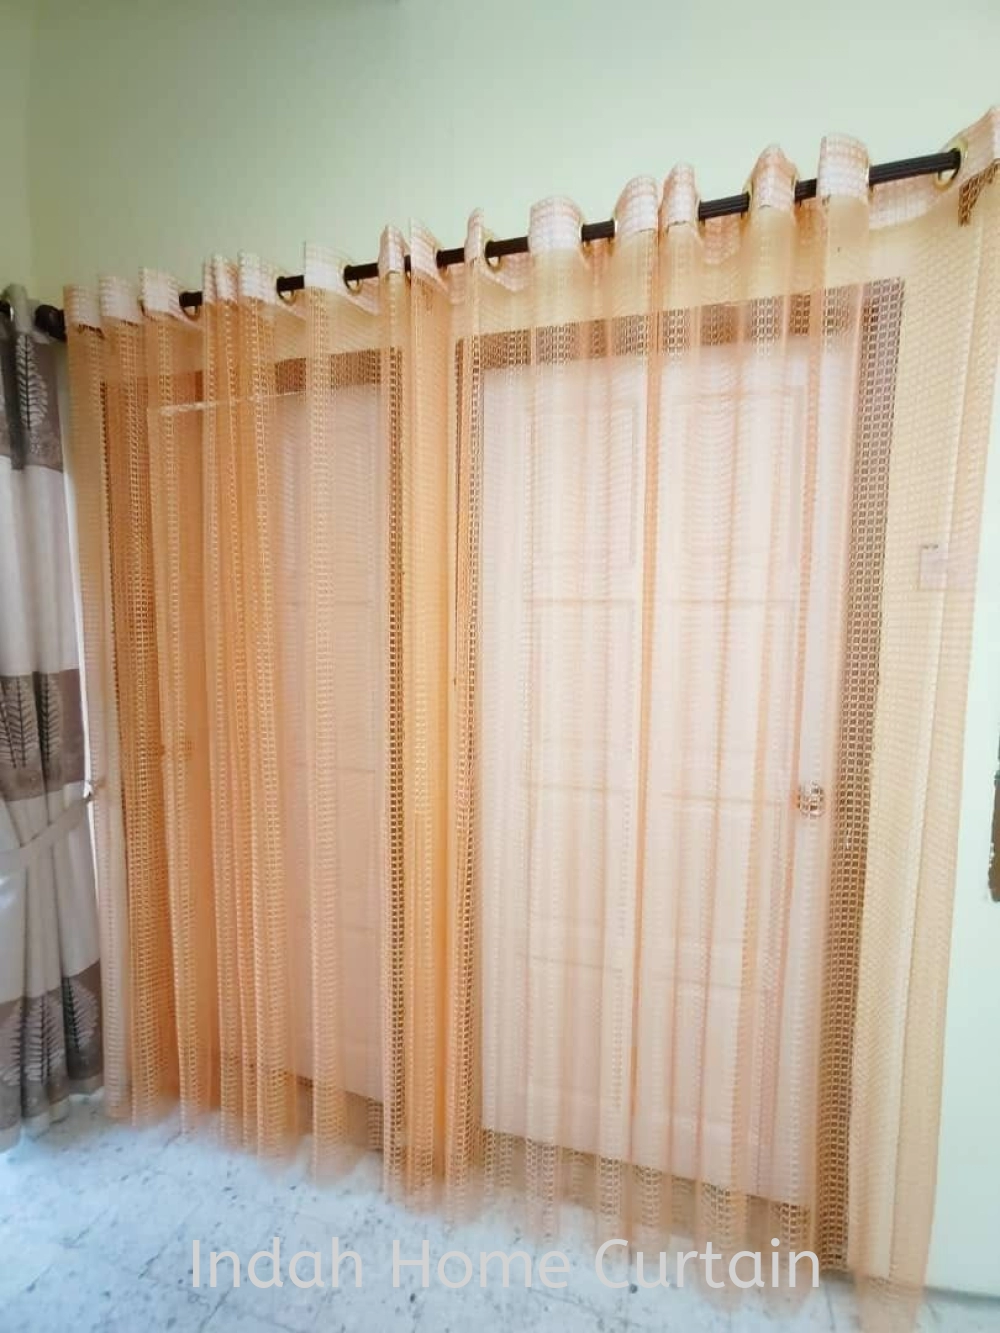 Installation Rod Aluminum with Curtain and Zebra Blind in Taman Maznah Jalan Songket 5 Single Storey House 